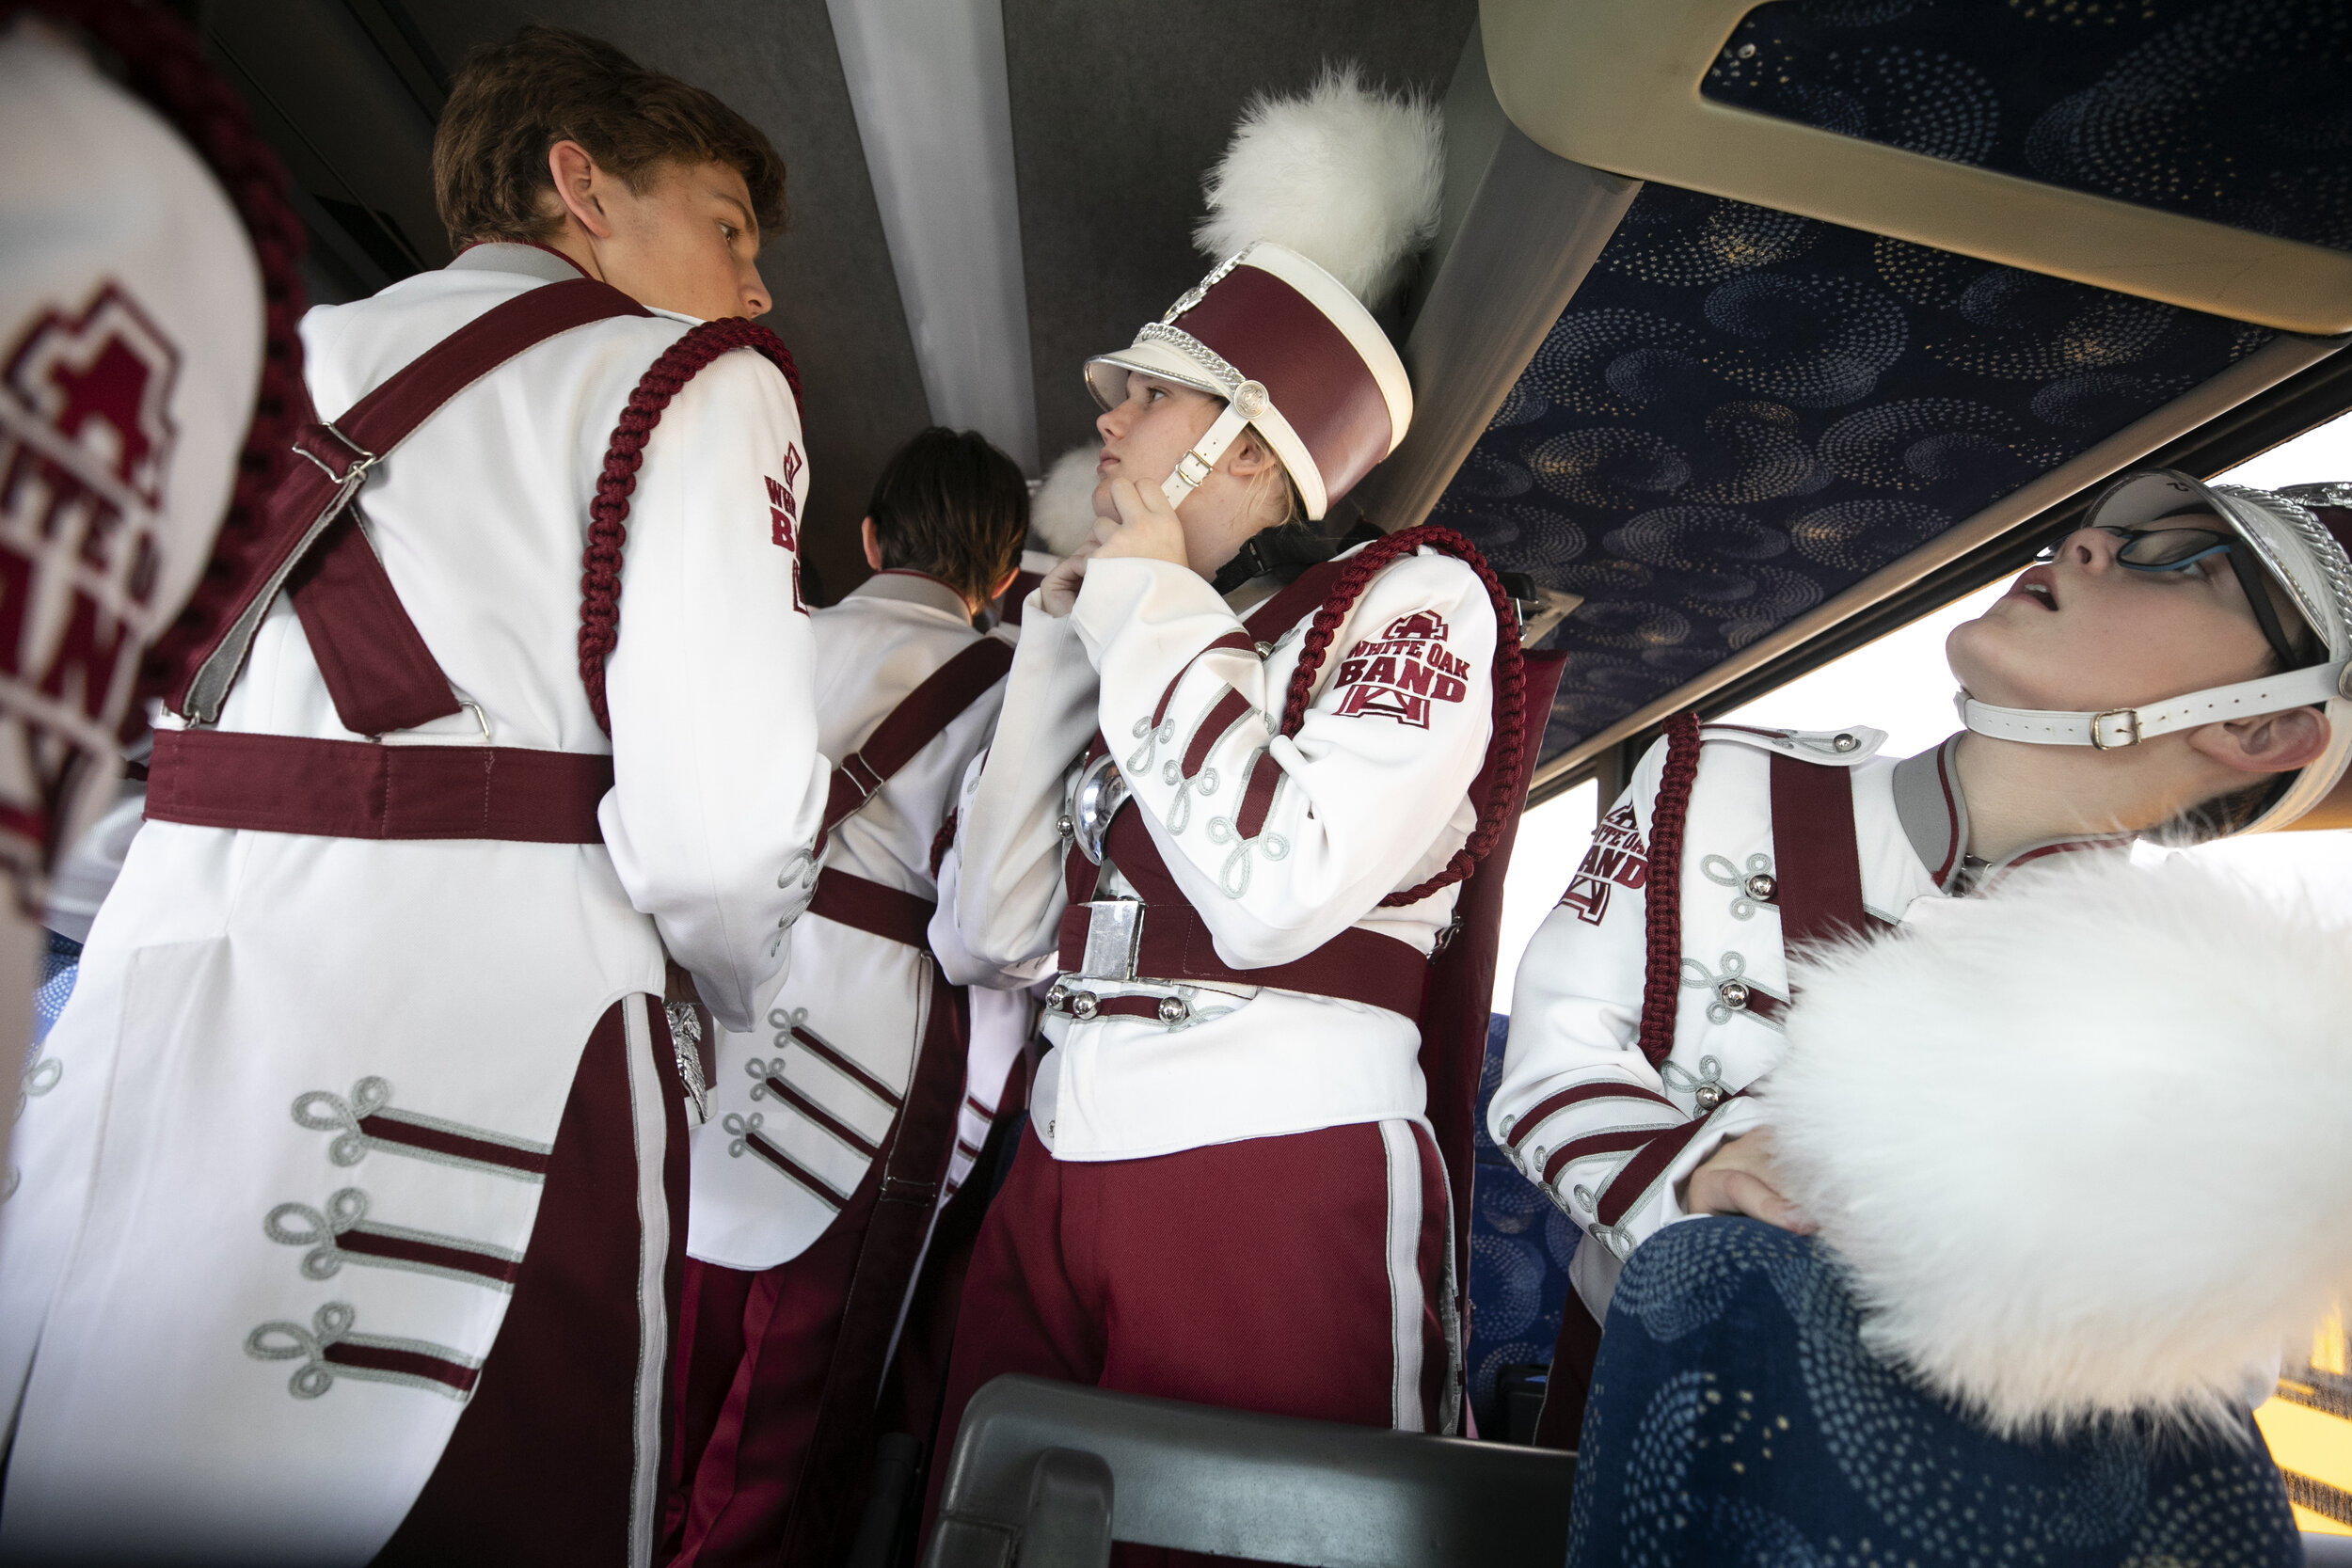  Students from White Oak High School prepare their uniforms on the school bus before entering the Alamodome for the UIL State Marching Band Competition. For many of the students from the small East Texas school, it was their first time traveling to a